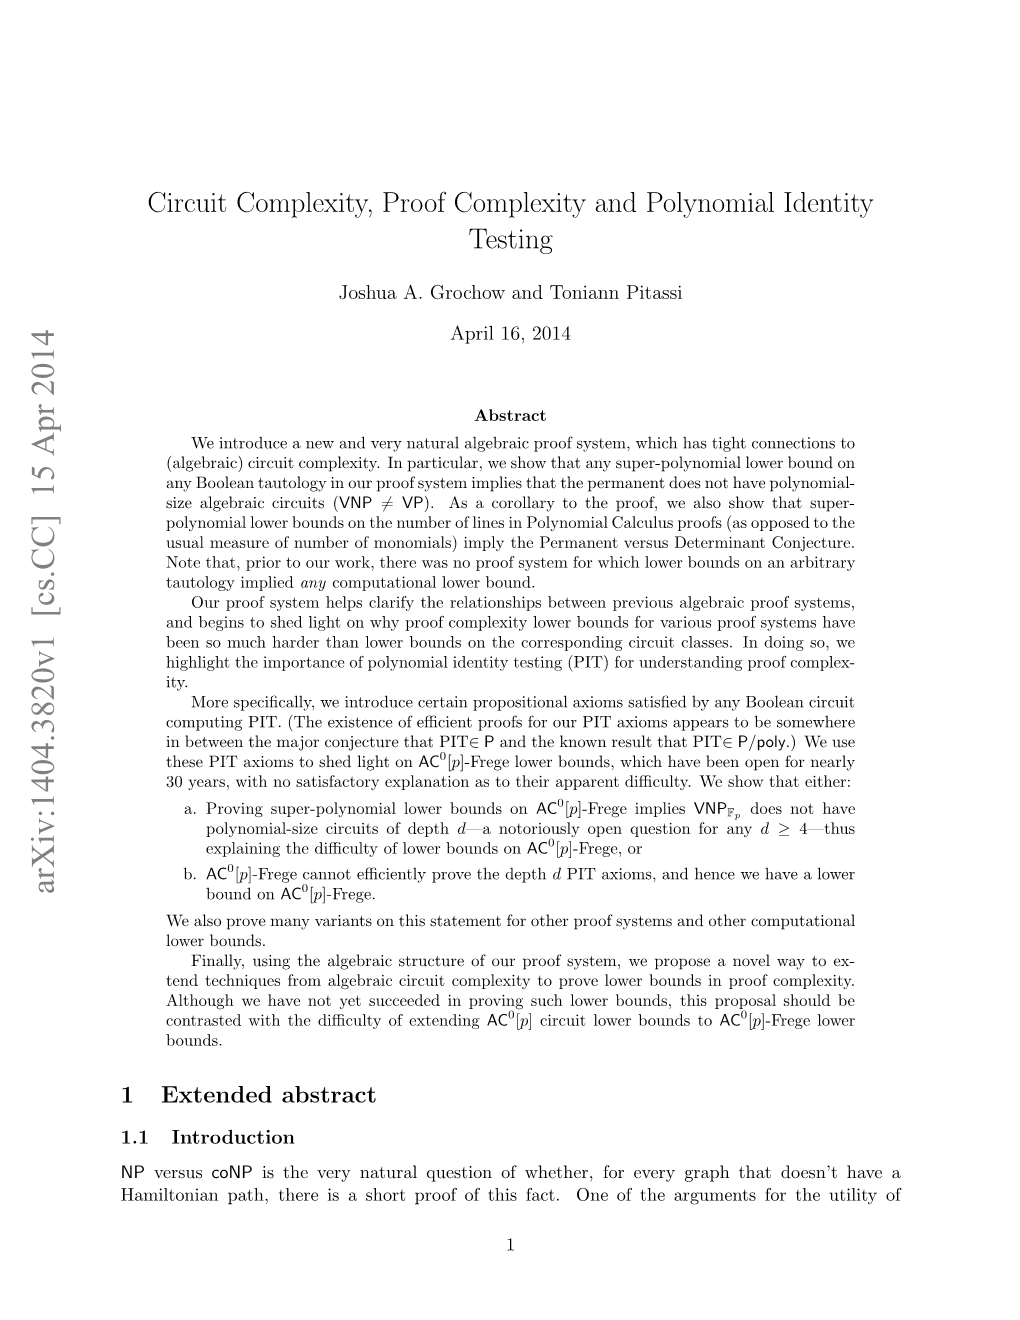 Circuit Complexity, Proof Complexity, and Polynomial Identity Testing